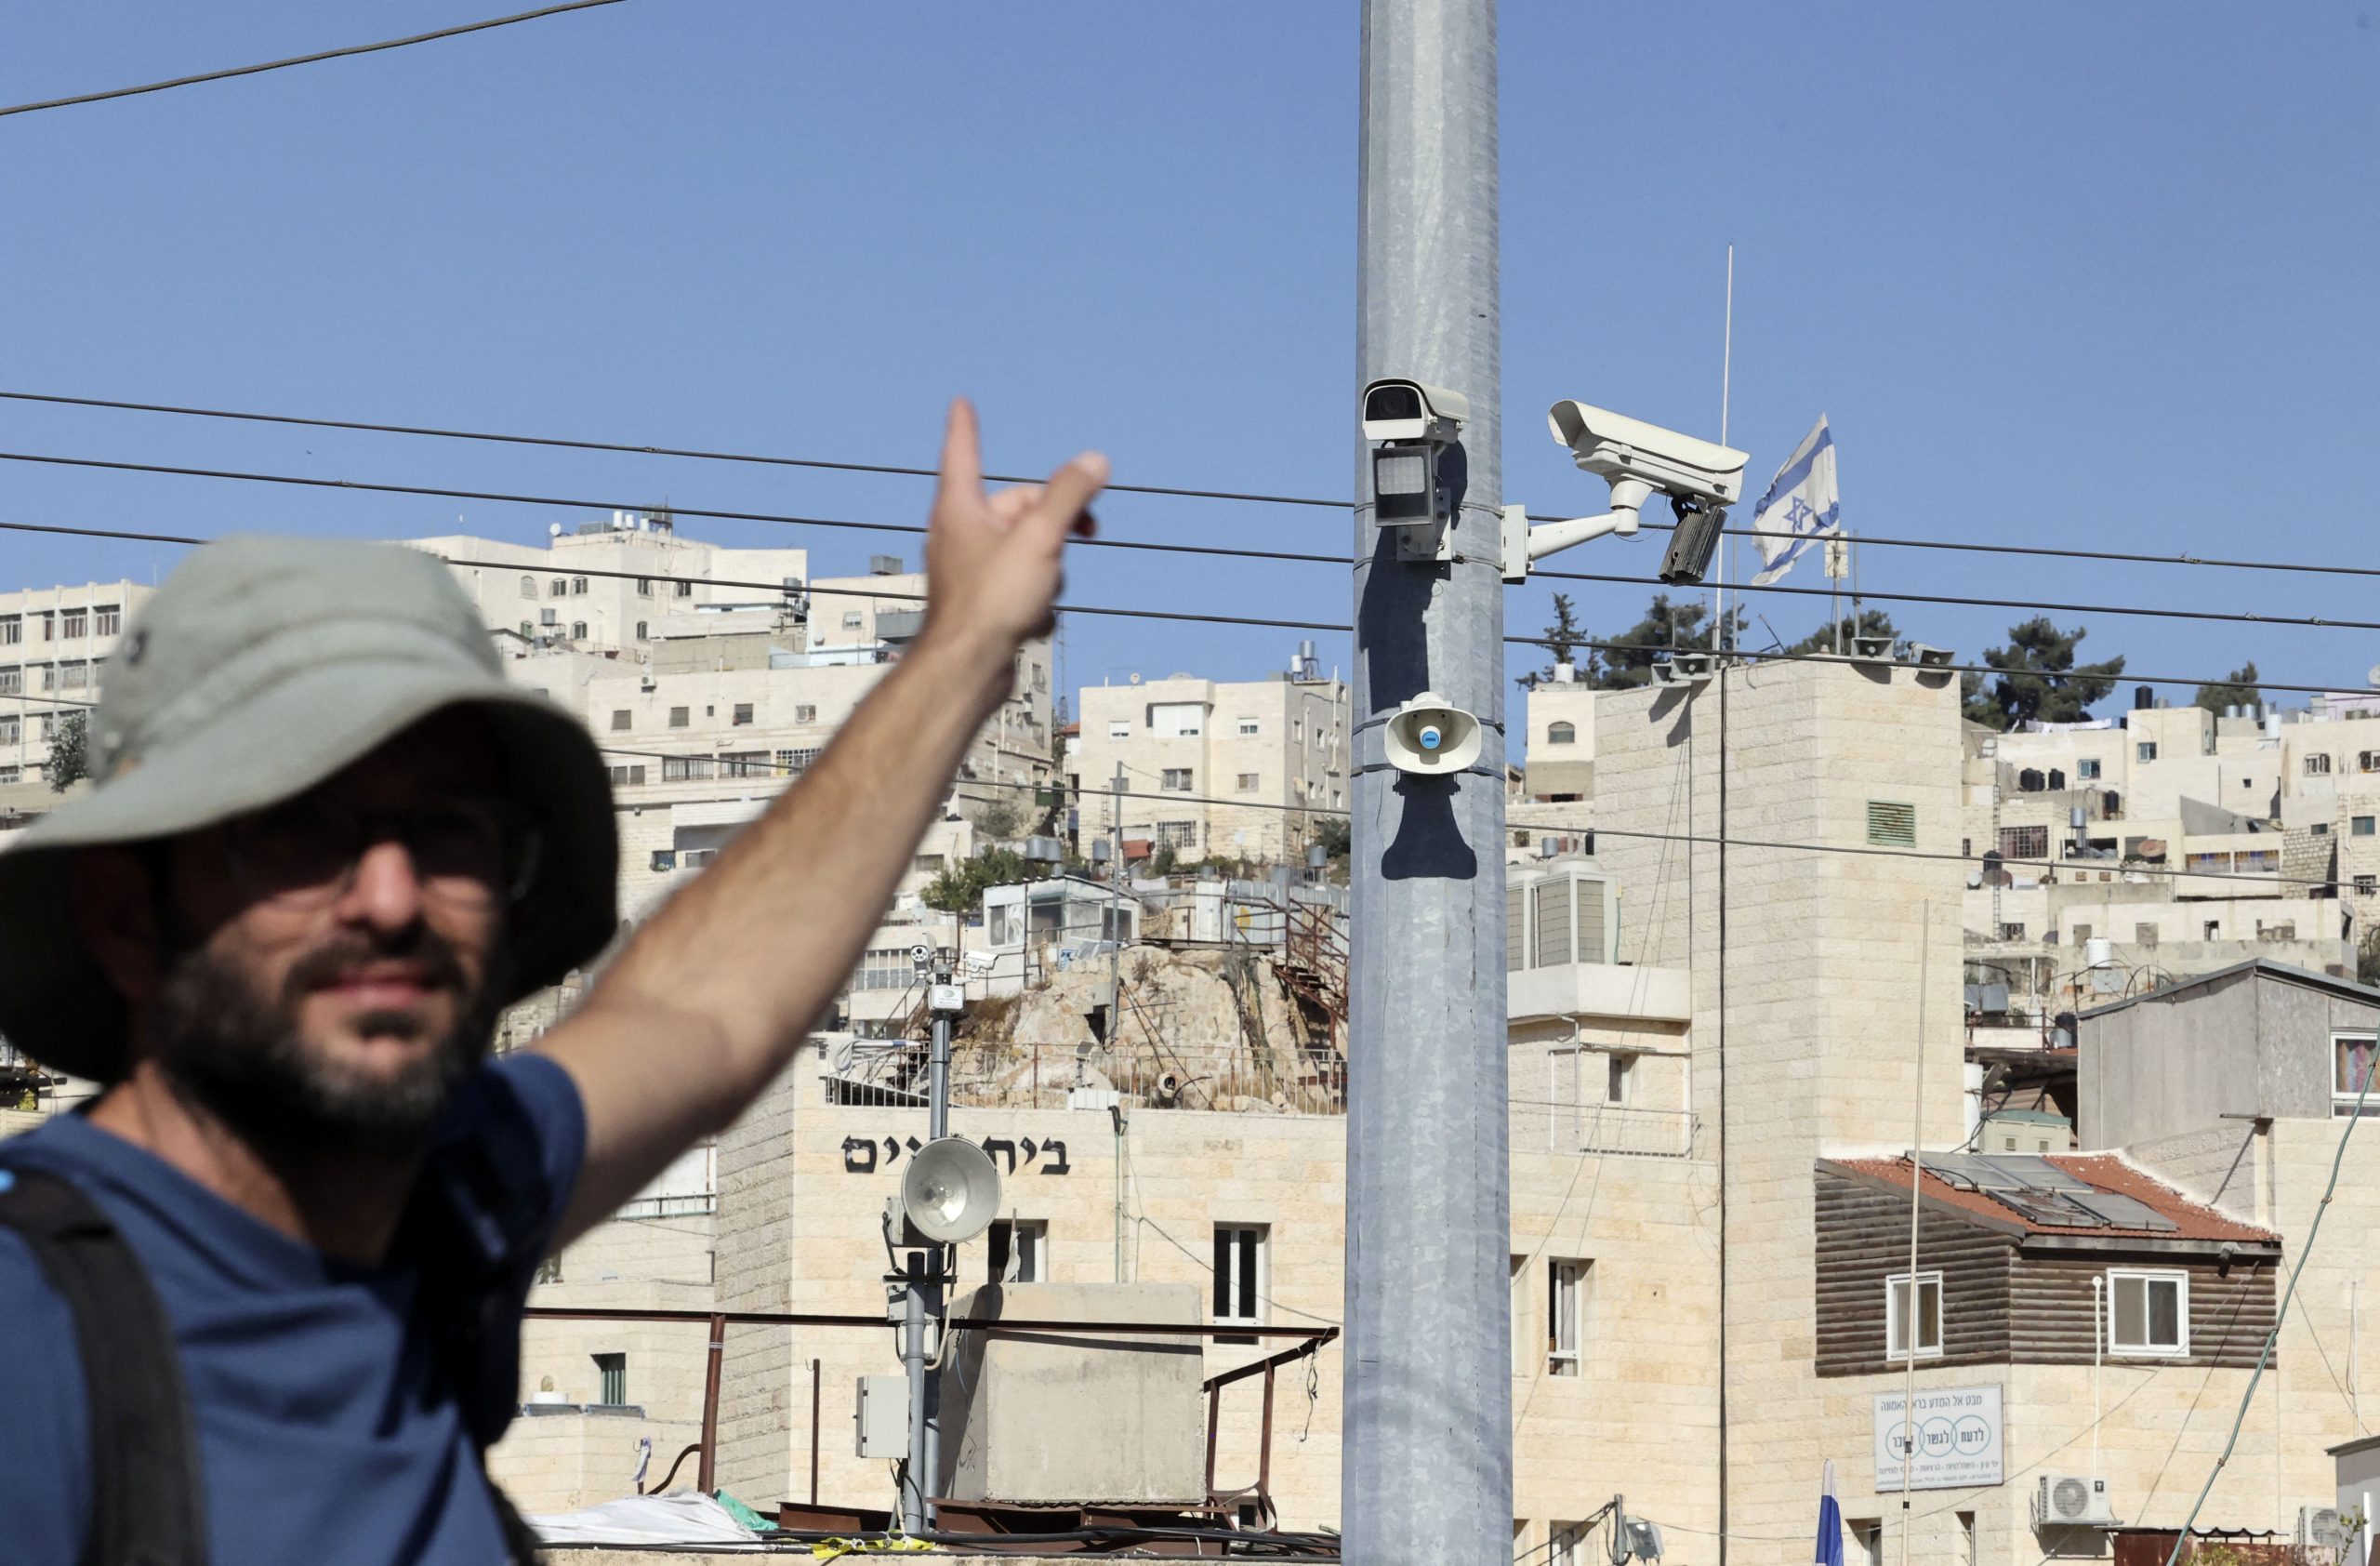 On Tuesday, Amnesty International released a report demonstrating the Israeli attempts to set up state-of-the-art facial recognition technology at checkpoints in Hebron, a West Bank city, to acquire biometric info from Palestinians.